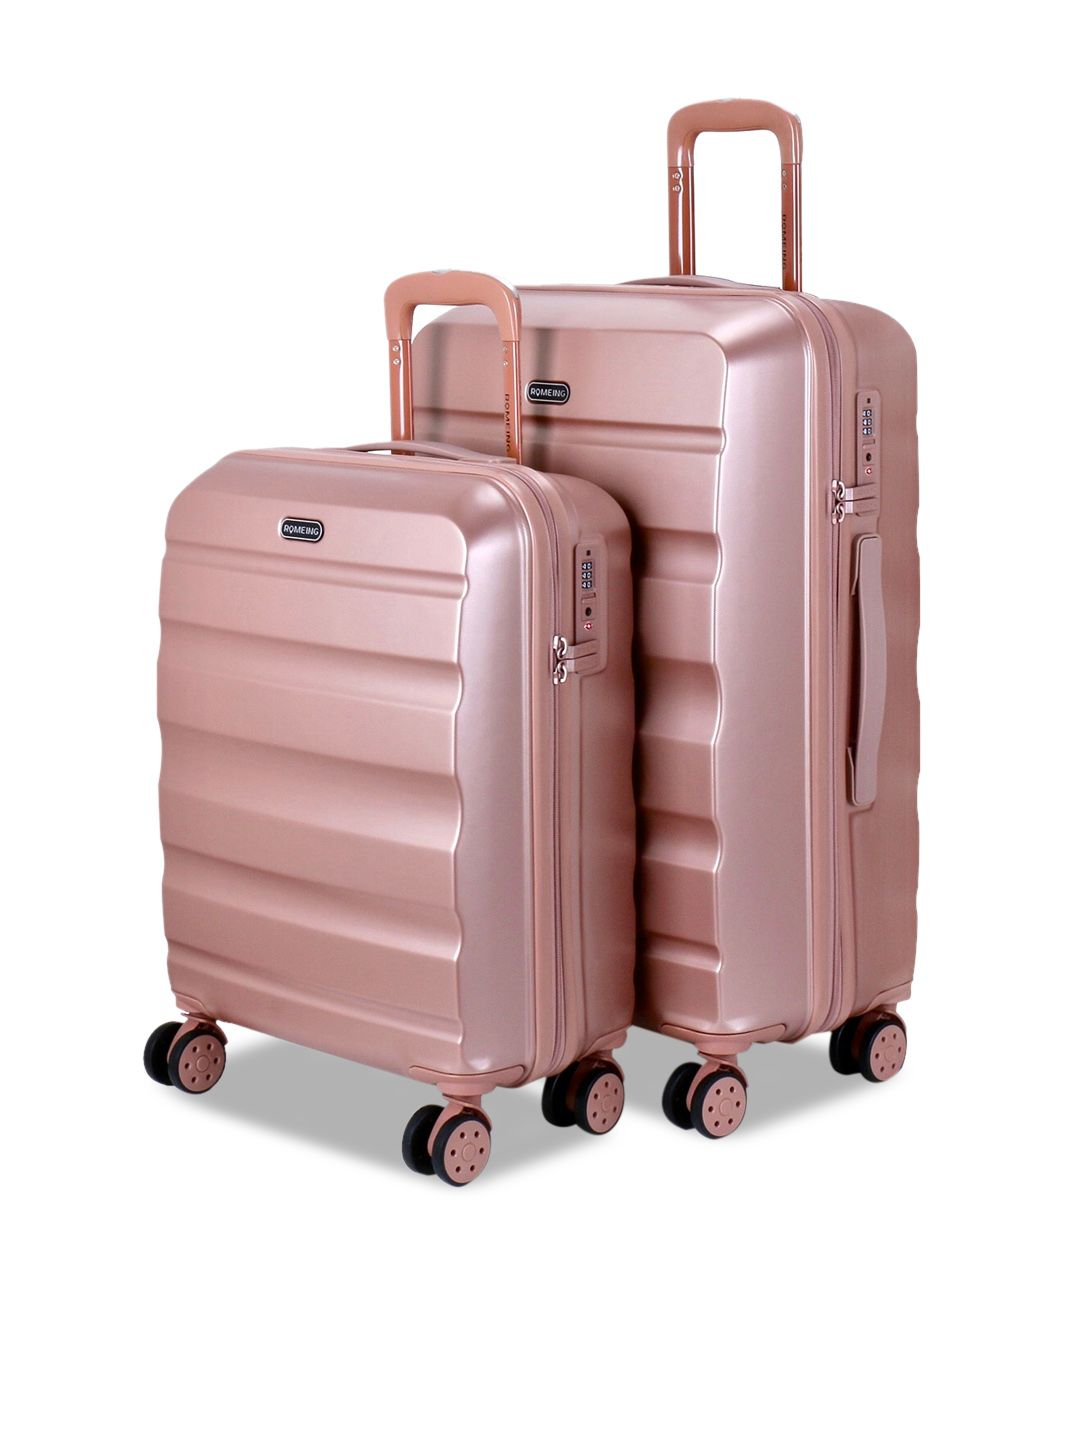 ROMEING Venice Set Of 2 Rose Gold Patterned Hard-Sided Polycarbonate Trolley Bags Price in India